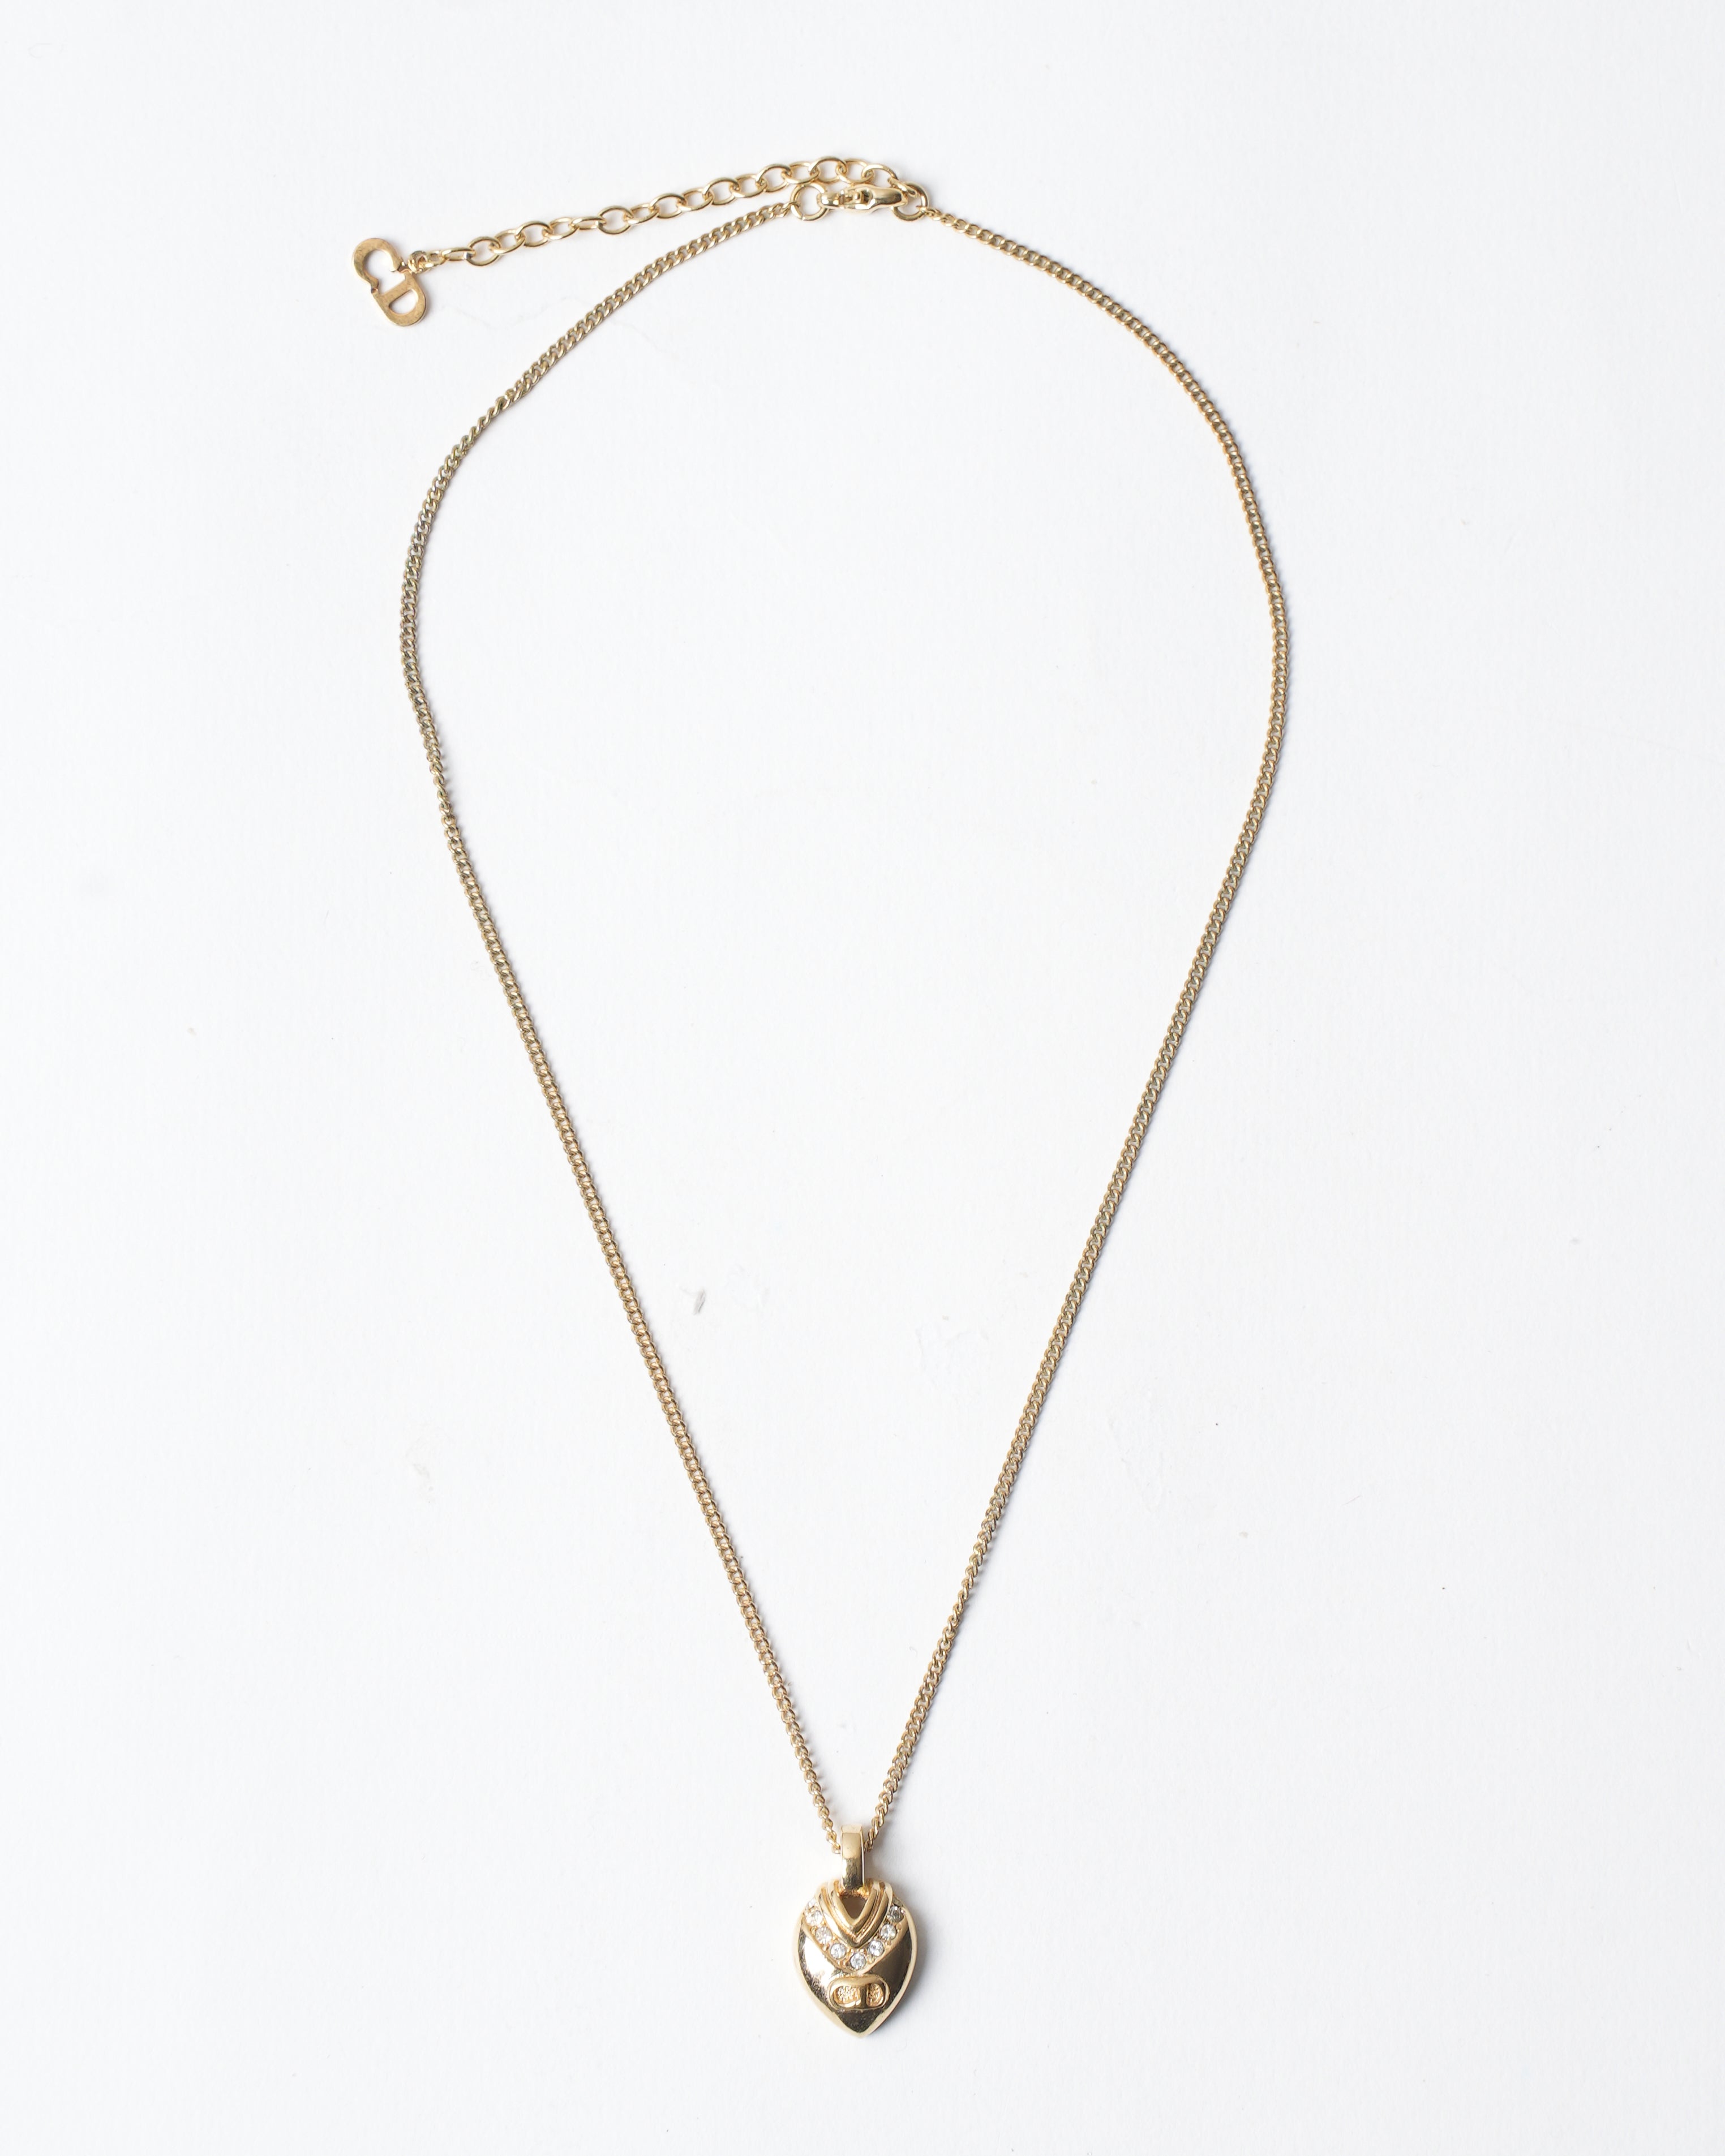 Vintage Christian Dior Gold Plated Cross Necklace